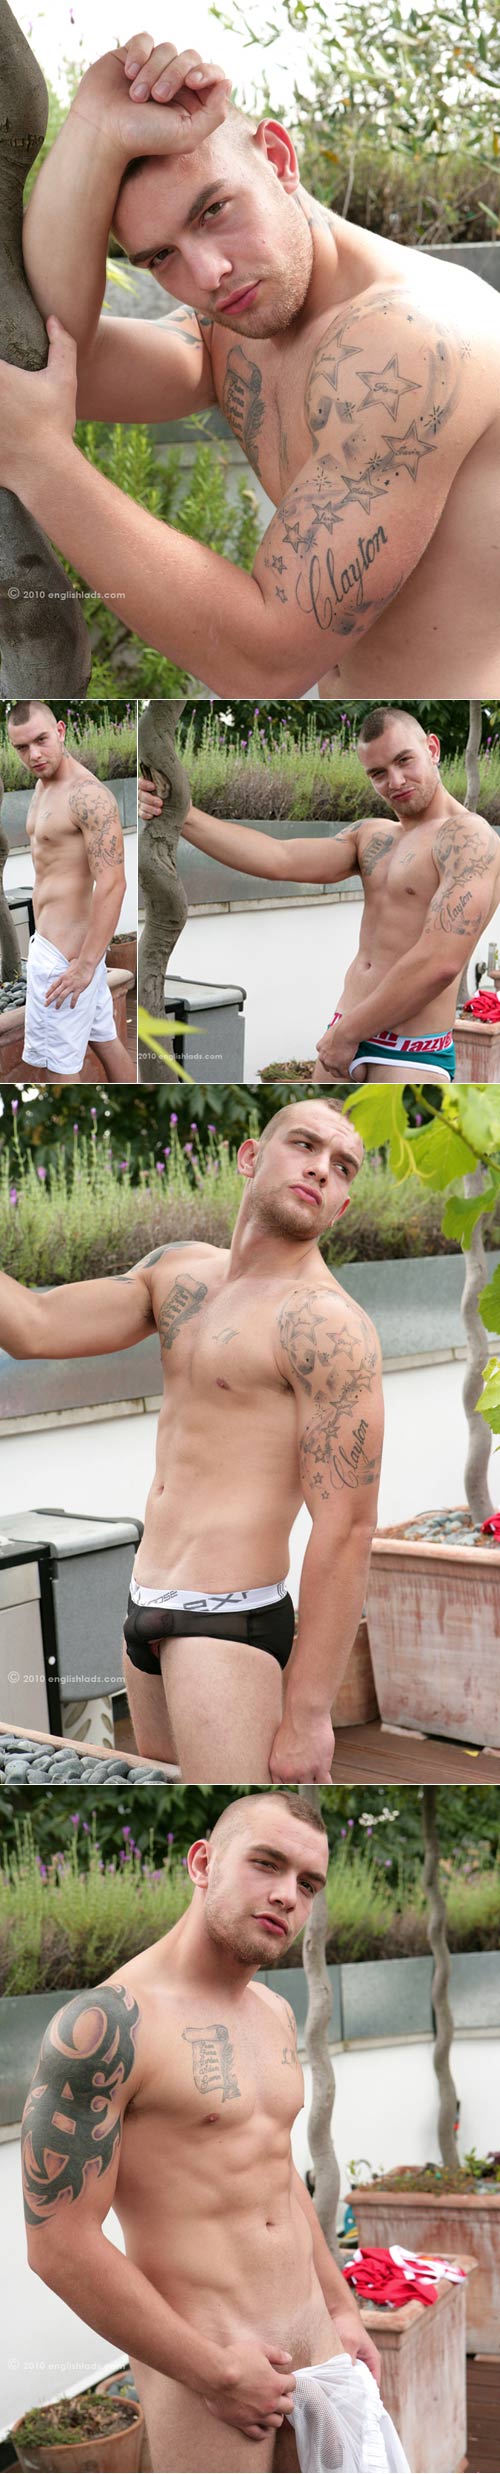 Andy Lee (Tall, Tattoed, Muscular & Ripped) at EnglishLads